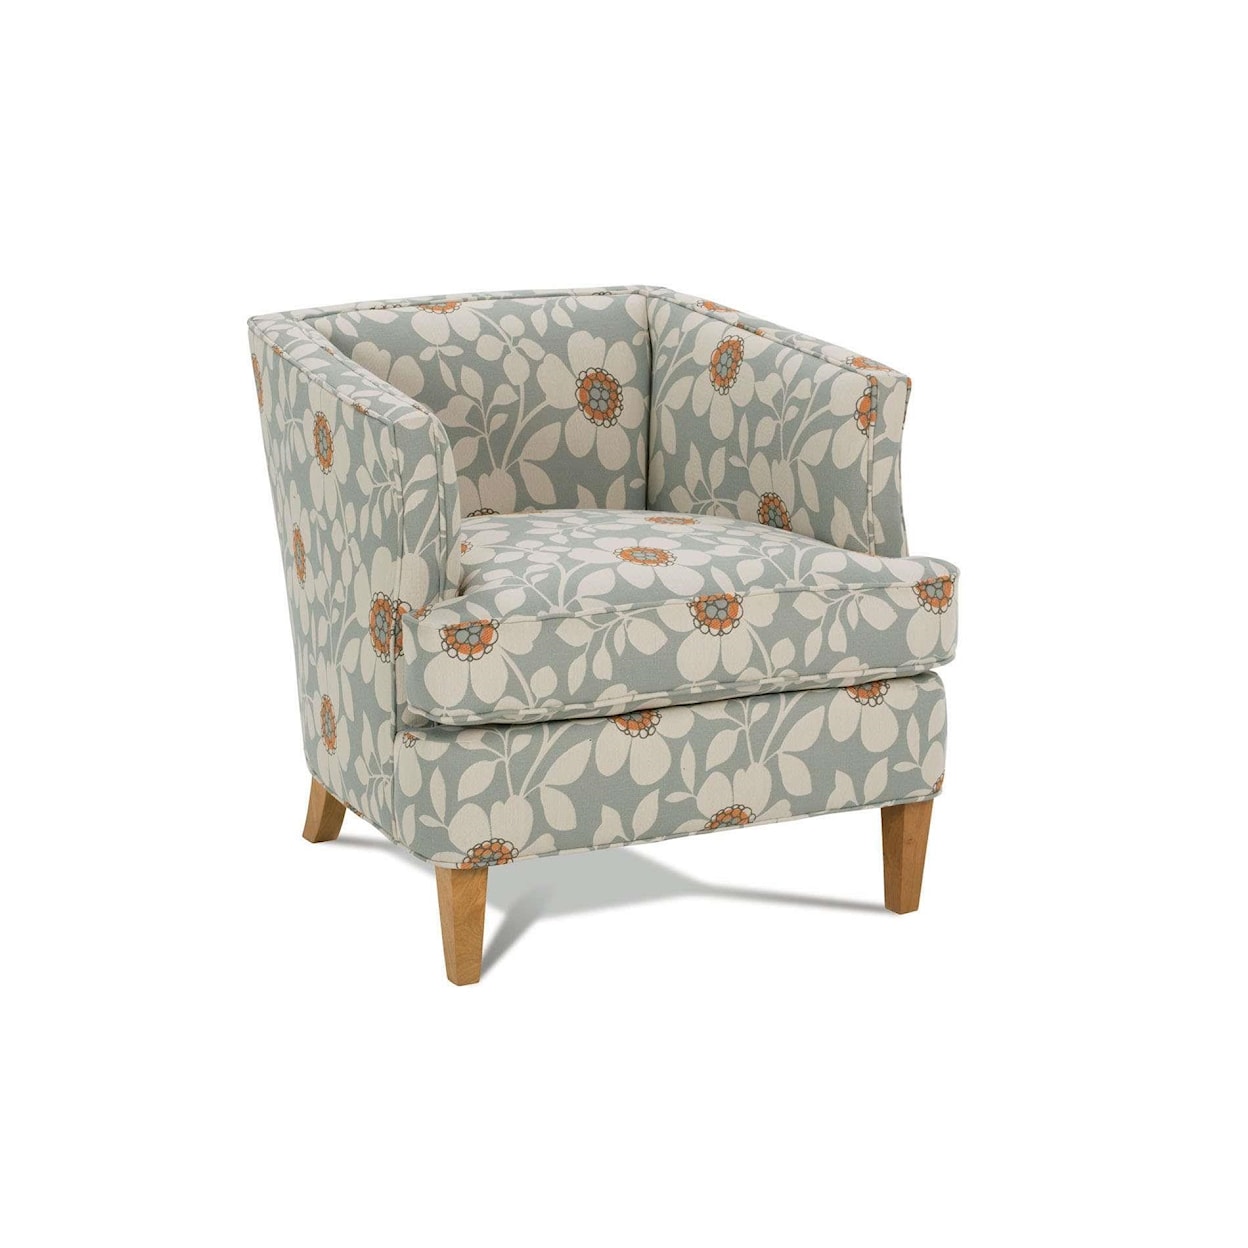 Rowe Piper Upholstered Chair